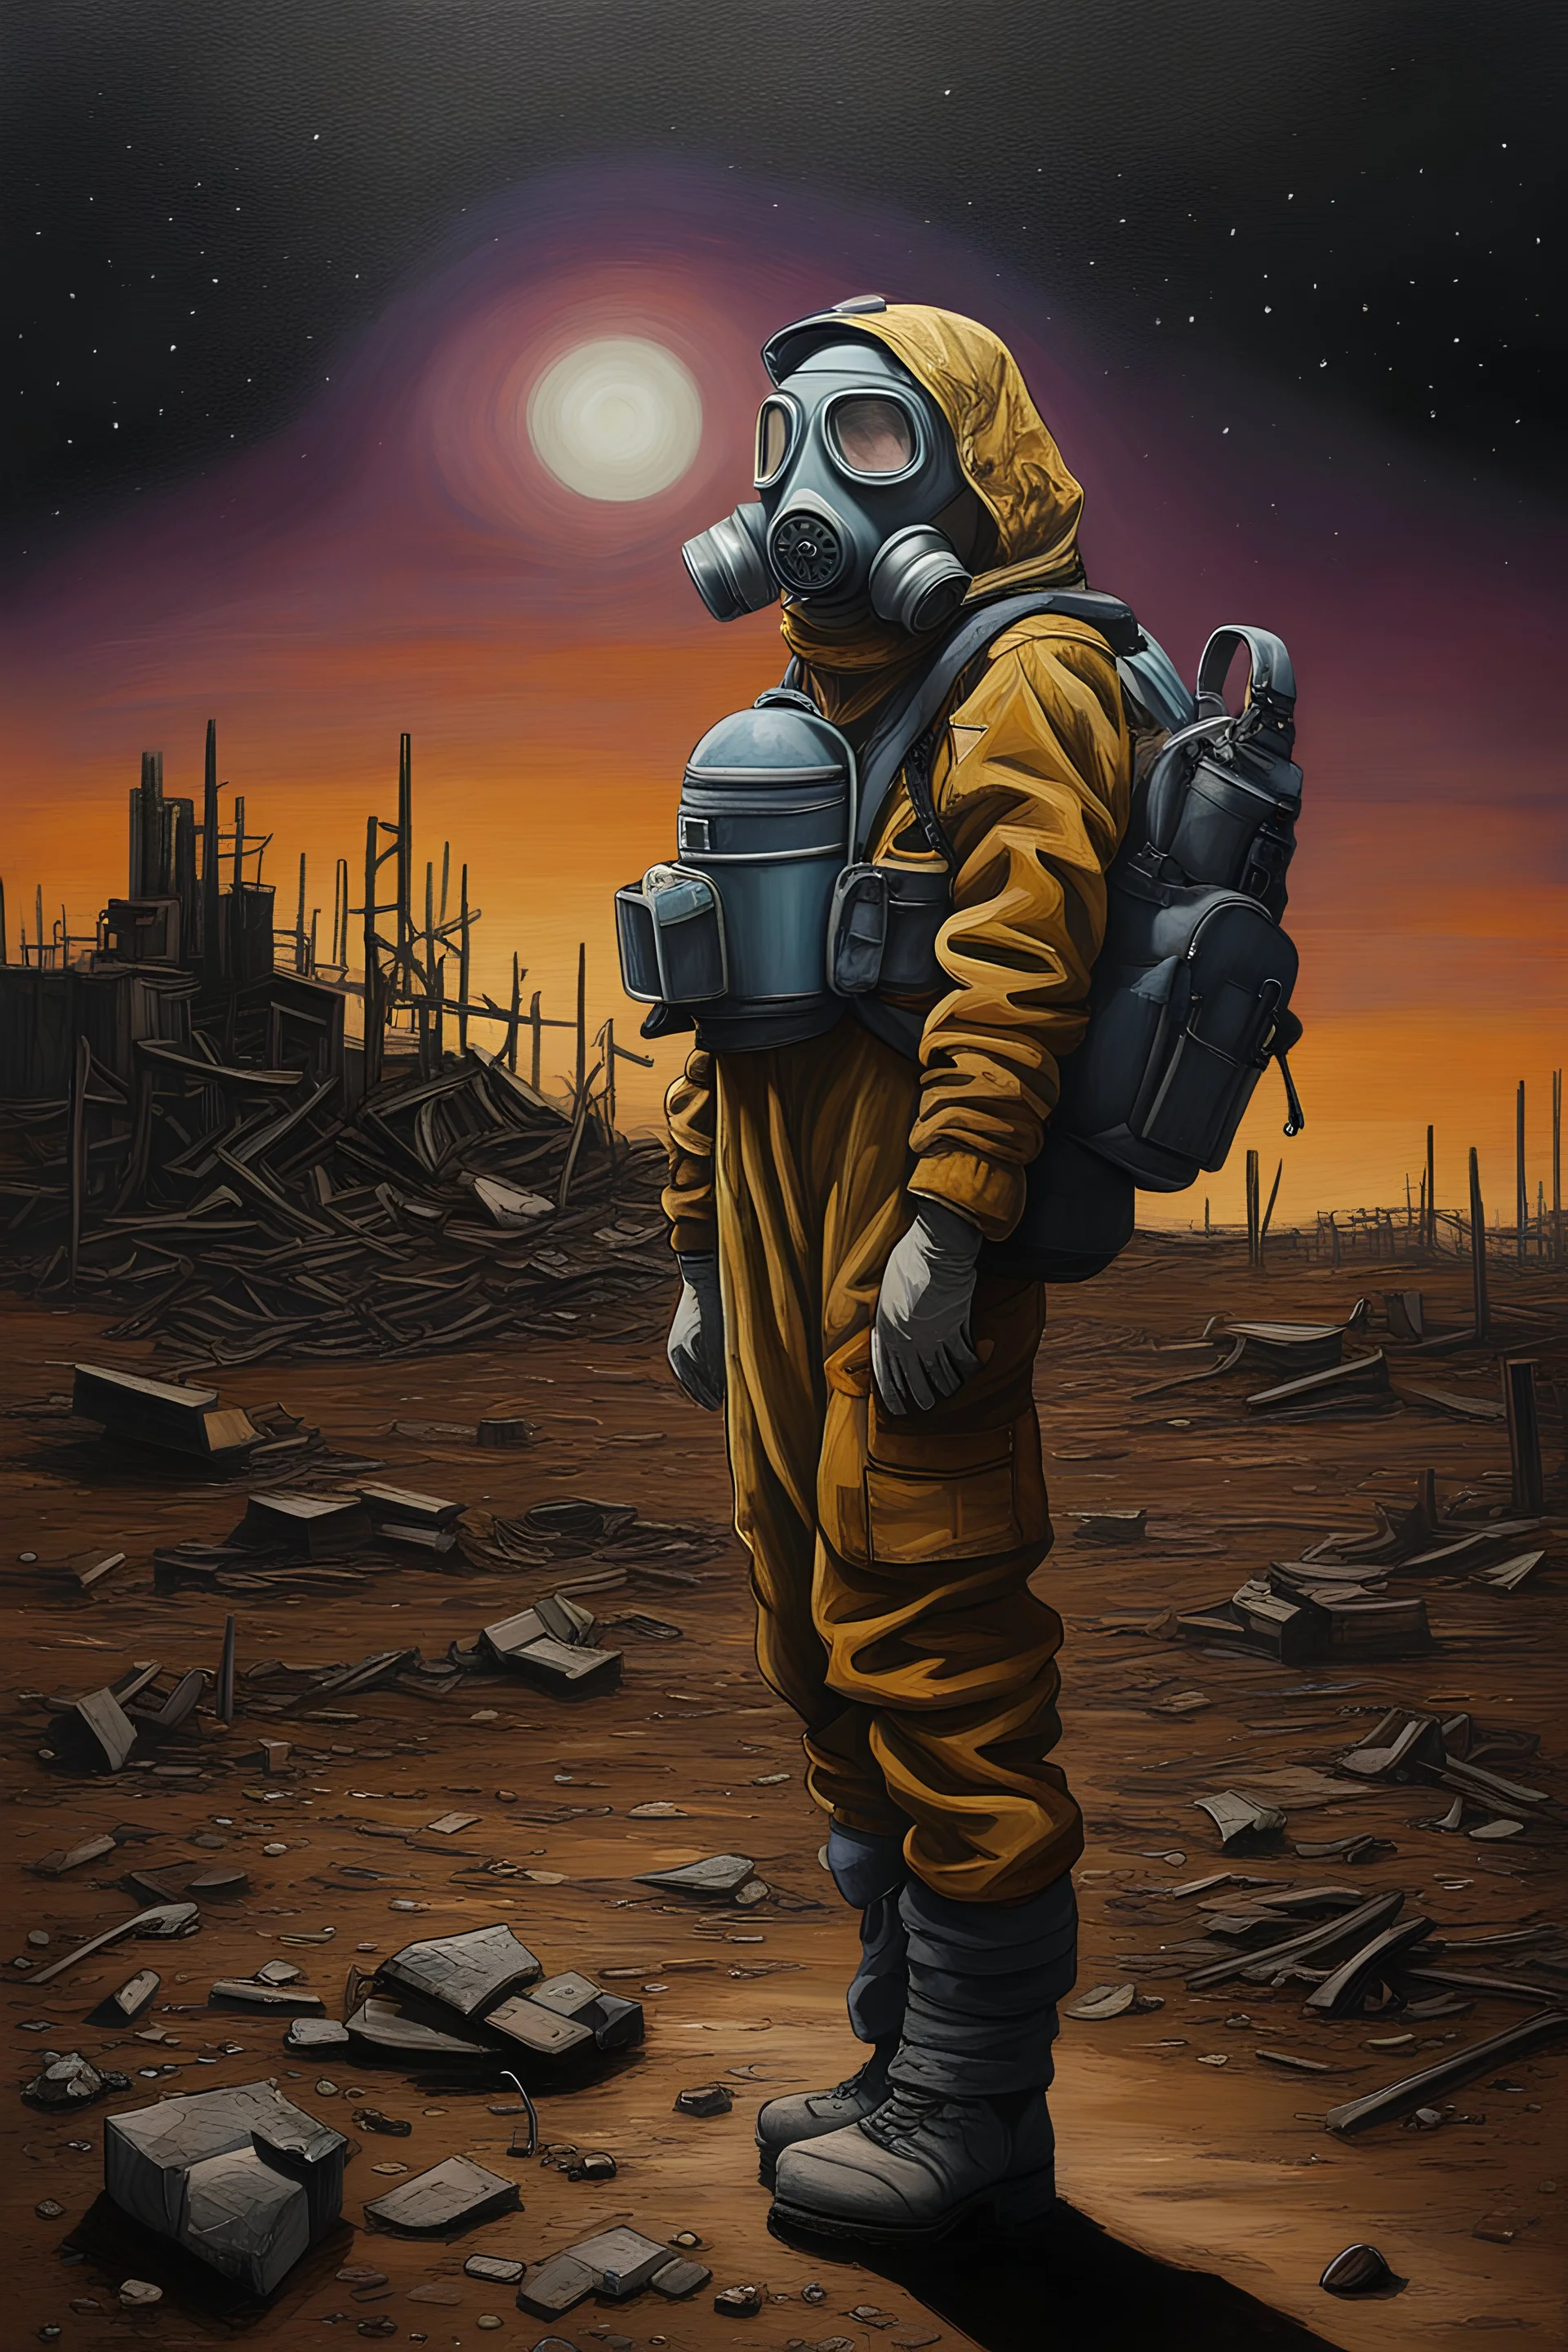 a mesmerizing post-apocalyptic world, the sky filled with stars at night, broken buildings surrounded by debris, the floor is covered with dirt and iridescent oil, a sense of beauty and destruction. An acrylic painting of a lone woman wearing highly detailed safety clothes, wearing a gas mask, aanstanding on a barren. (Acrylic painting by MSchiffer showcasing the meticulous brushstrokes and depth of colors.) Acrylic paint blobs in relief, The pollution looks almost like glowy northern lights in